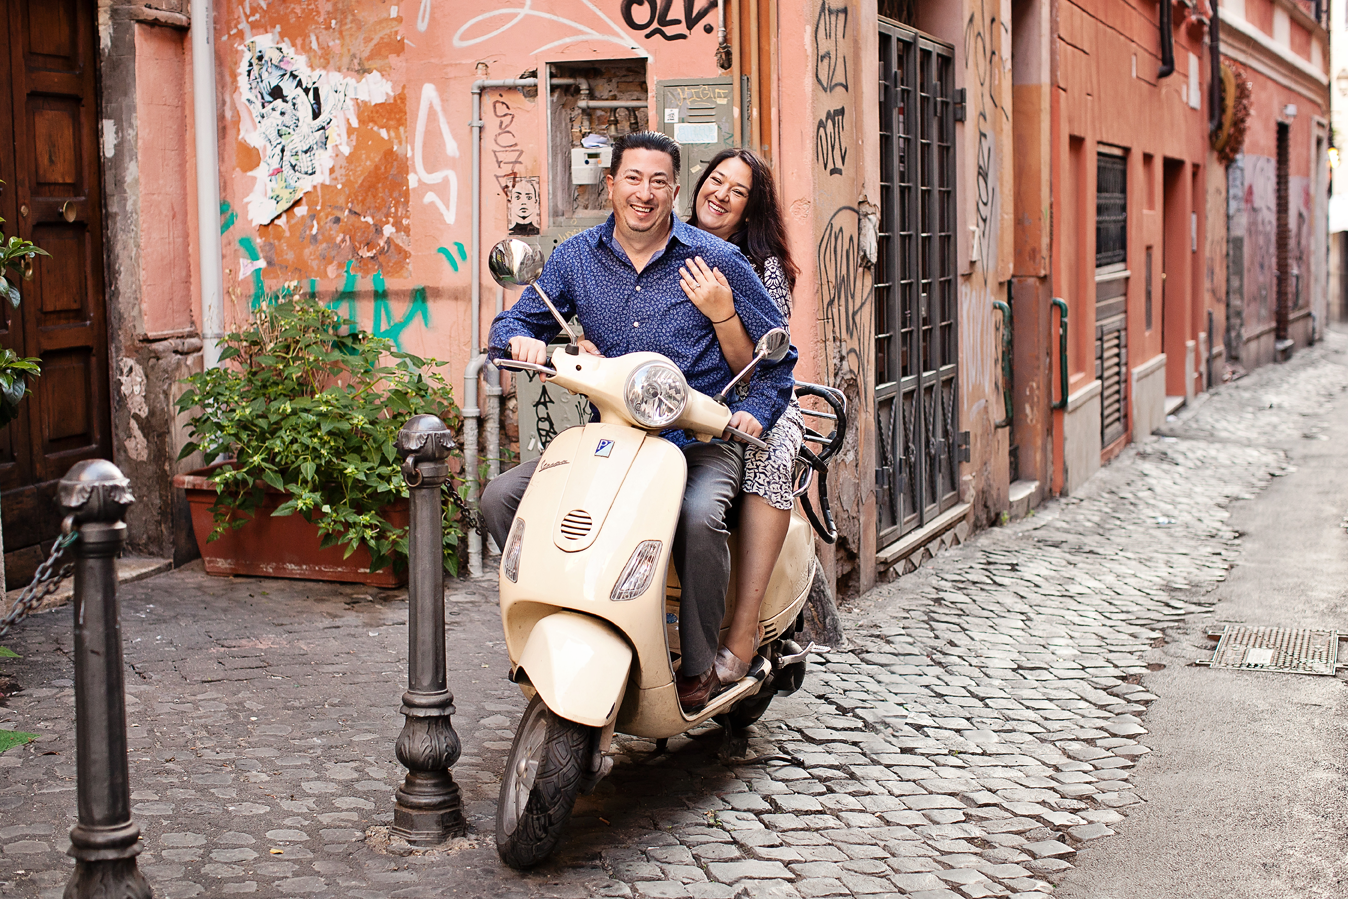 Honeymoon, vacation, family, engagement, maternity, wedding, love story individual and solo photoshoots in Rome, Italy by photographer Tricia Anne Photography | Rome Photographer, vacation, tripadvisor, instagram, fun, married, bride, groom, love story, photography session rome, photoshoot rome, wedding photographer, vacation photographer, Trastevere Photoshoot, English speaking photographer in Rome